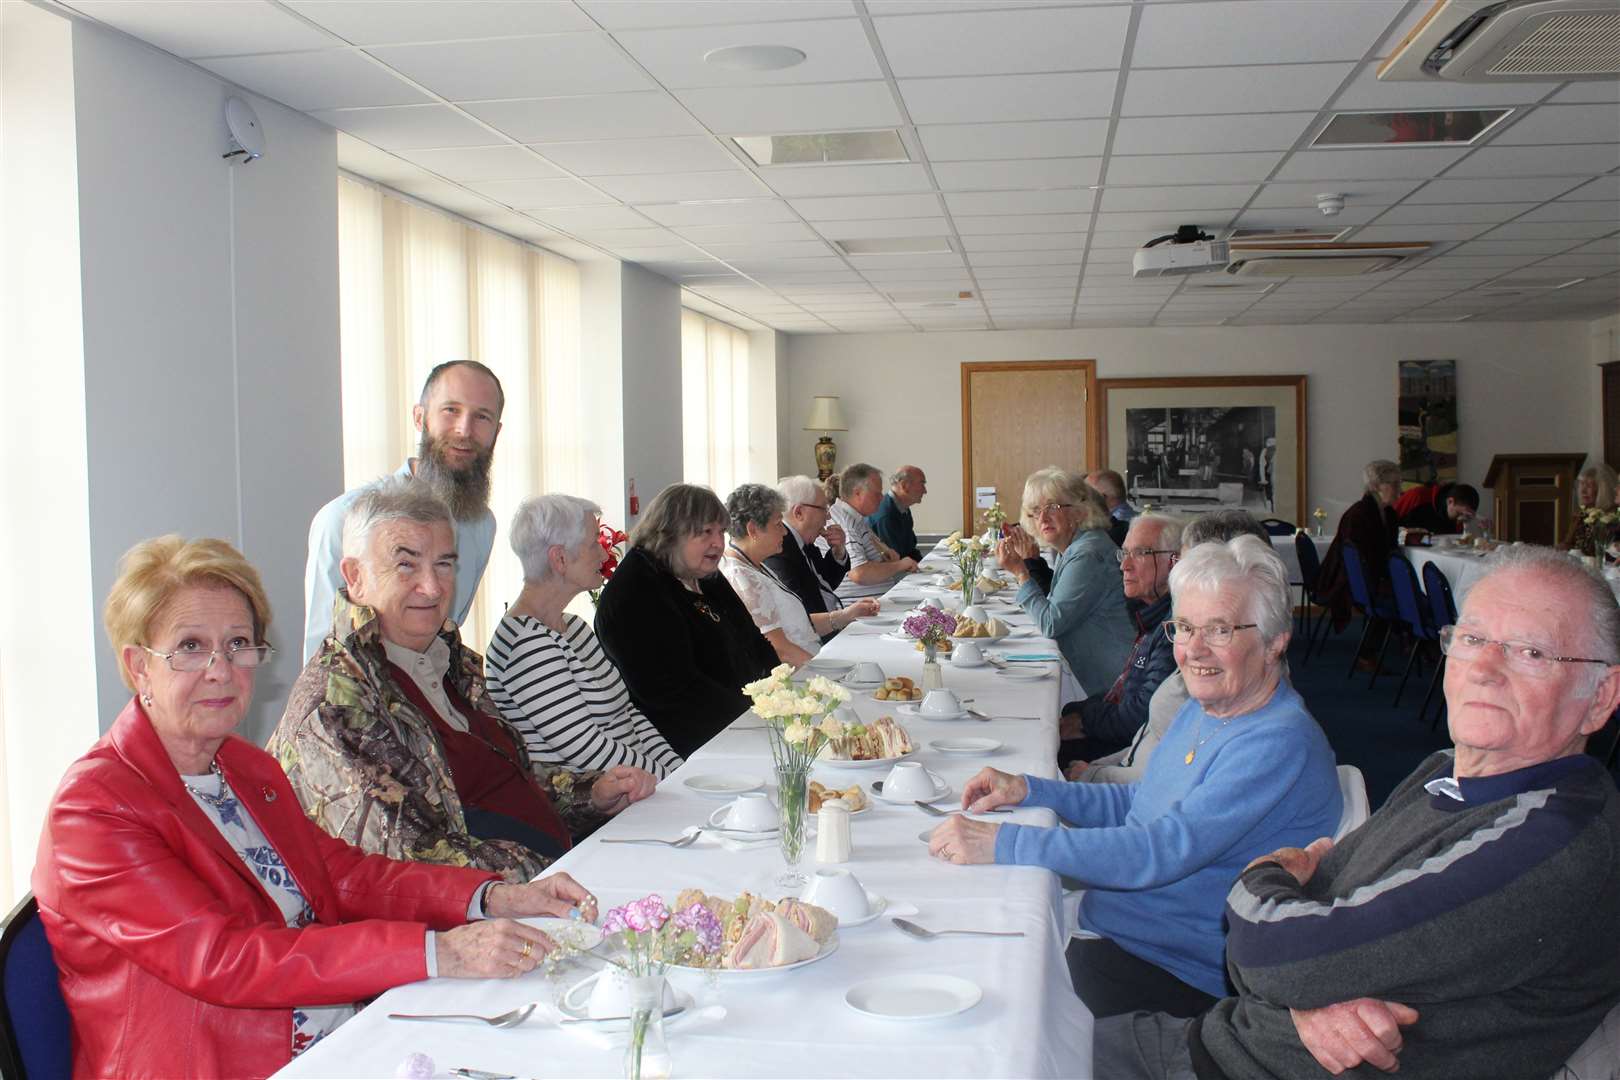 Volunteers were treated to lunch at the Heritage Centre